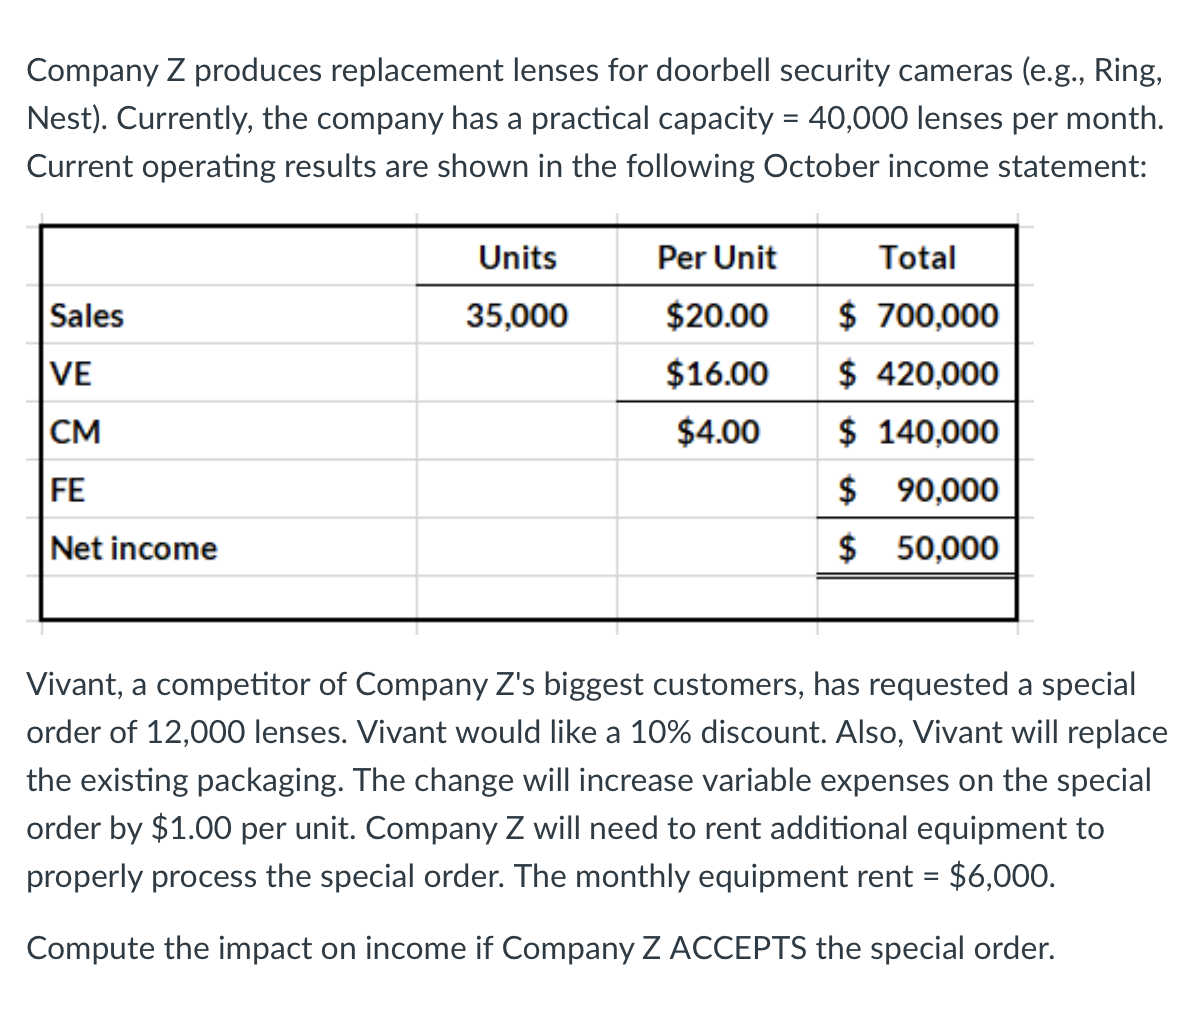 Company Z produces replacement lenses for doorbell security cameras (e.g., Ring,
Nest). Currently, the company has a practical capacity = 40,000 lenses per month.
Current operating results are shown in the following October income statement:
Units
Per Unit
Total
Sales
35,000
$20.00
$ 700,000
VE
$16.00
$ 420,000
CM
$4.00
$ 140,000
FE
$ 90,000
Net income
$ 50,000
Vivant, a competitor of Company Z's biggest customers, has requested a special
order of 12,000 lenses. Vivant would like a 10% discount. Also, Vivant will replace
the existing packaging. The change will increase variable expenses on the special
order by $1.00 per unit. Company Z will need to rent additional equipment to
properly process the special order. The monthly equipment rent = $6,000.
%3D
Compute the impact on income if Company Z ACCEPTS the special order.
